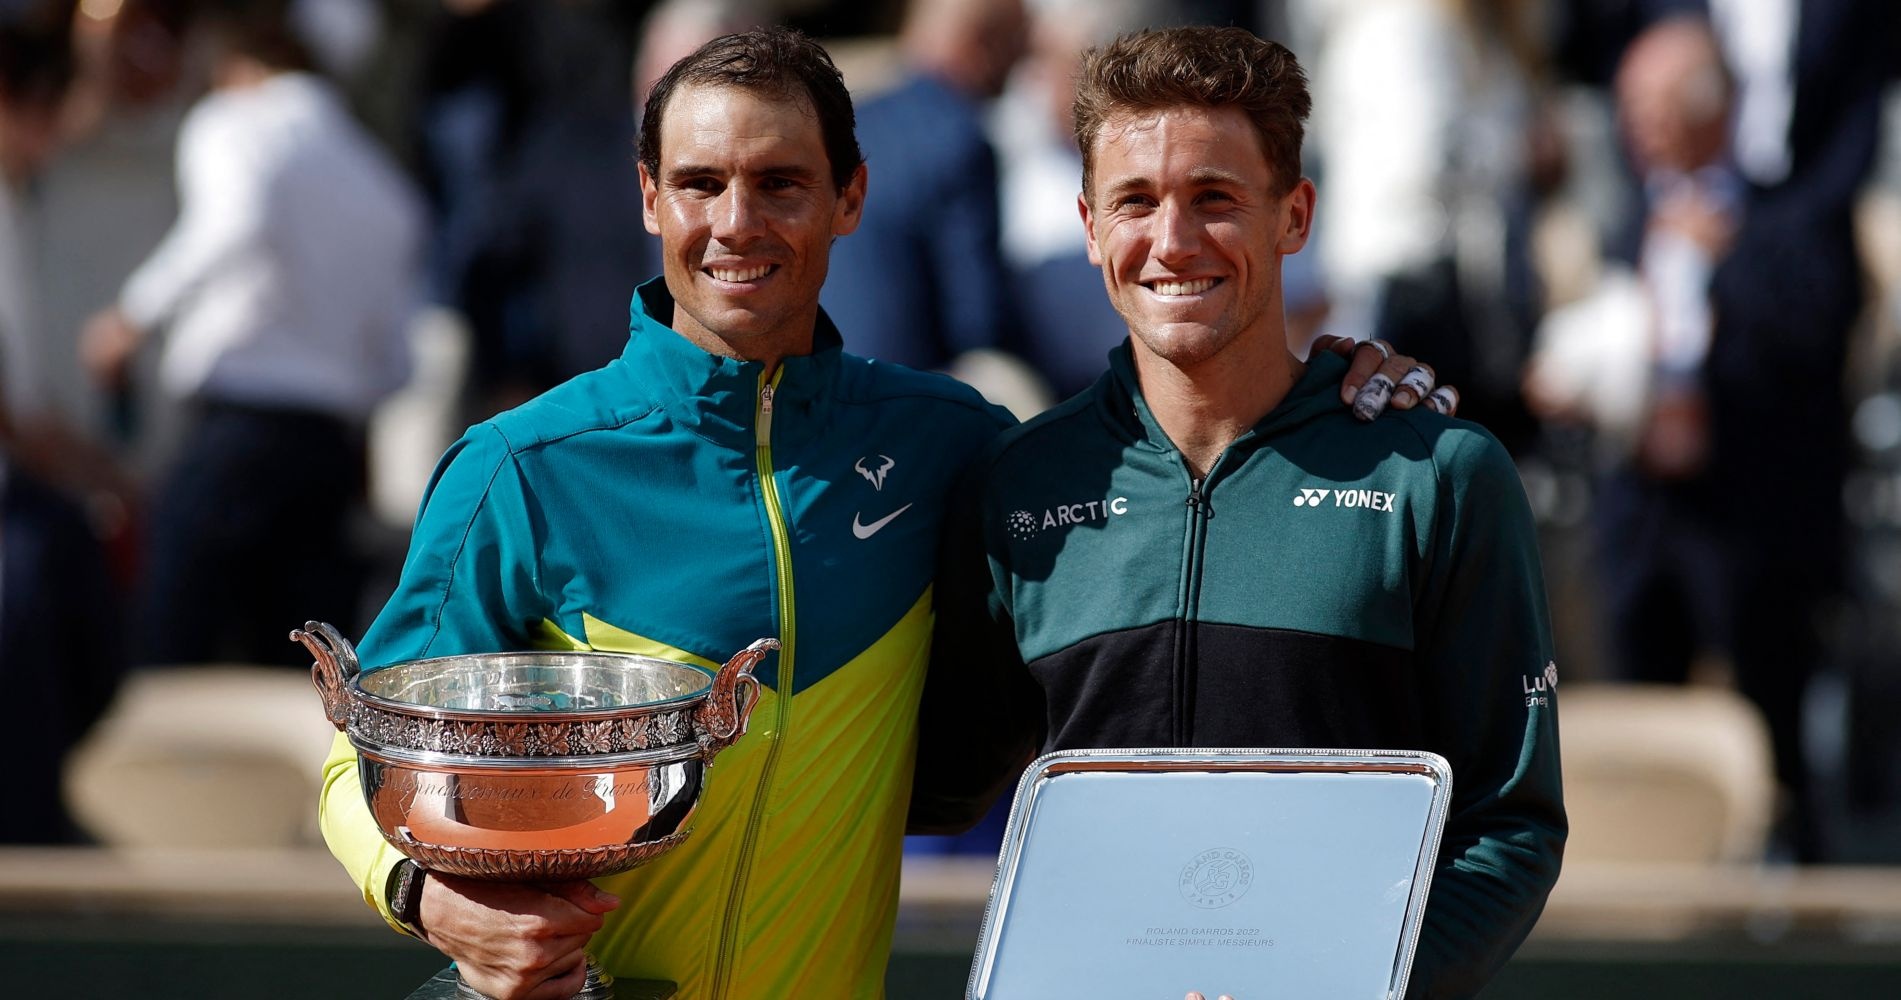 Spain's Rafael Nadal and Norway's Casper Ruud pose with trophies after the men's singles final at Roland Garros 2022